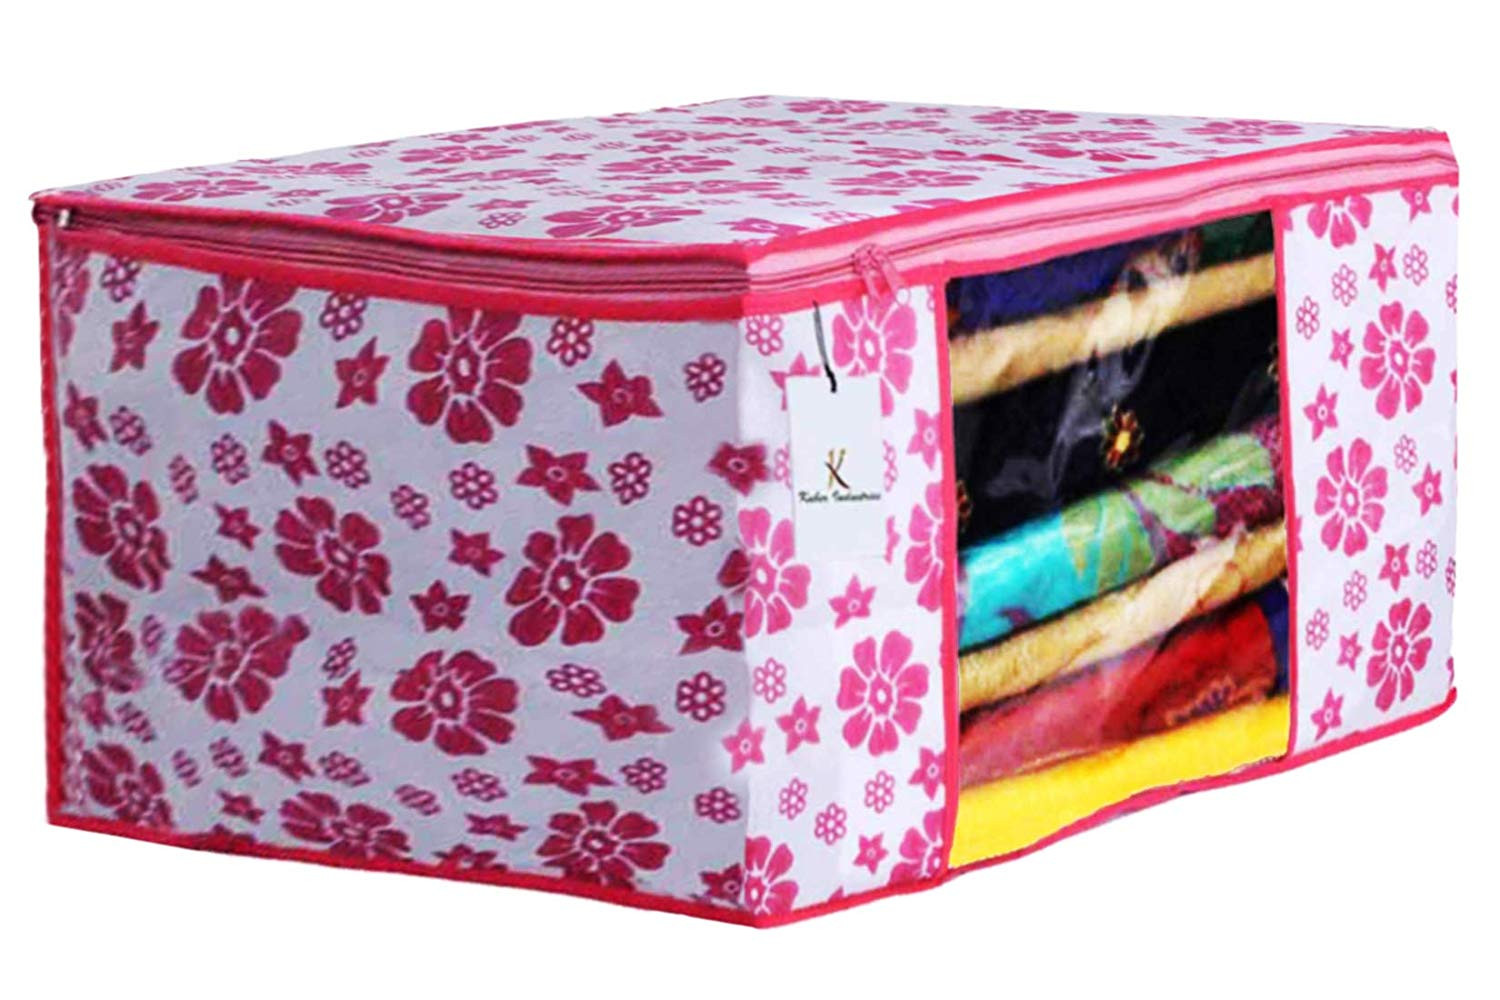 Kuber Industries Flower DesignNon Woven Saree Cover And Underbed Storage Bag, Storage Organiser, Blanket Cover, Pink & Blue  -CTKTC42367